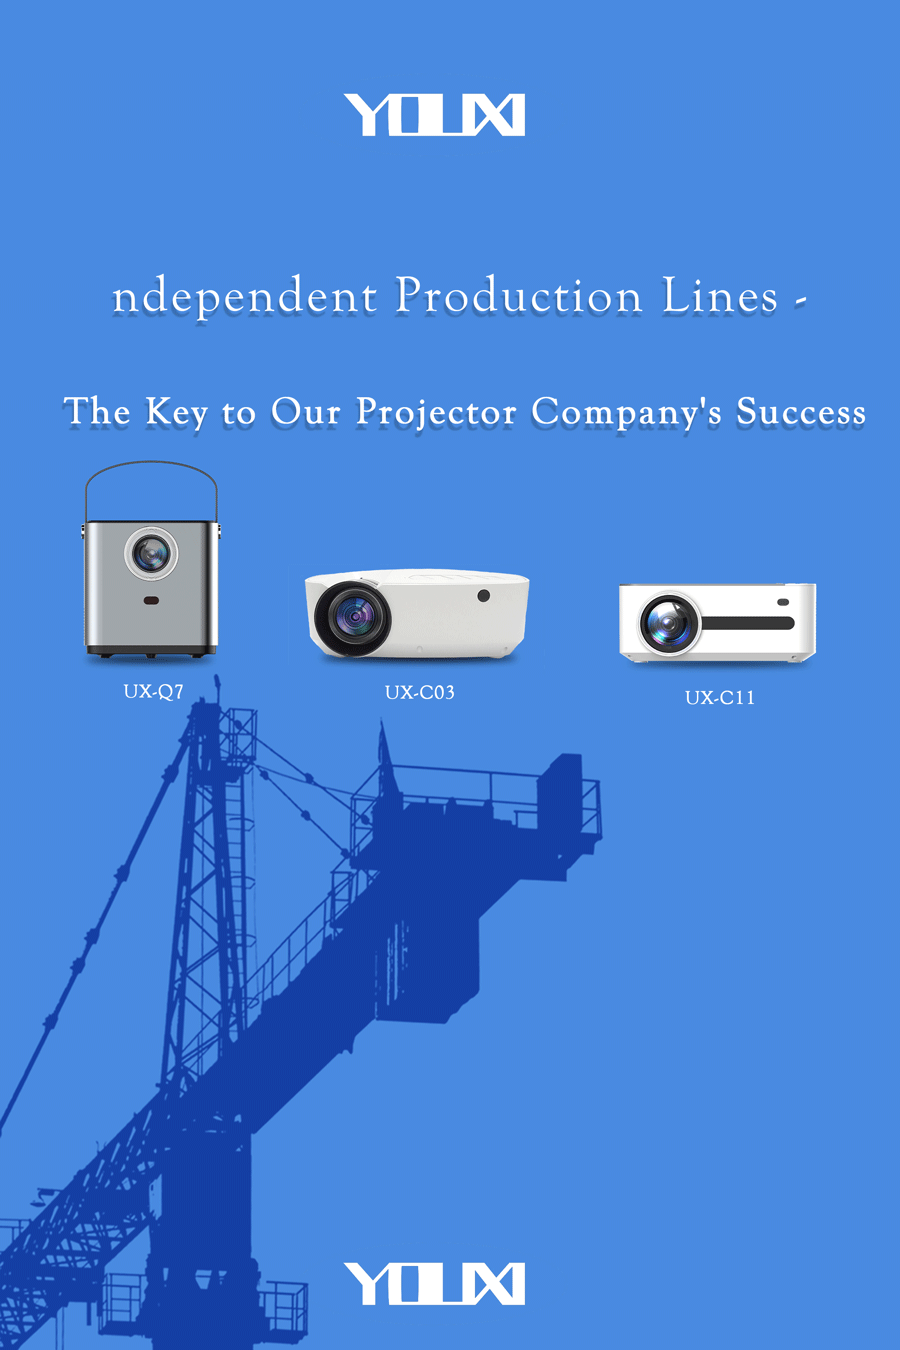 Independent Production Lines - The Key to Our Projector Company's Success"